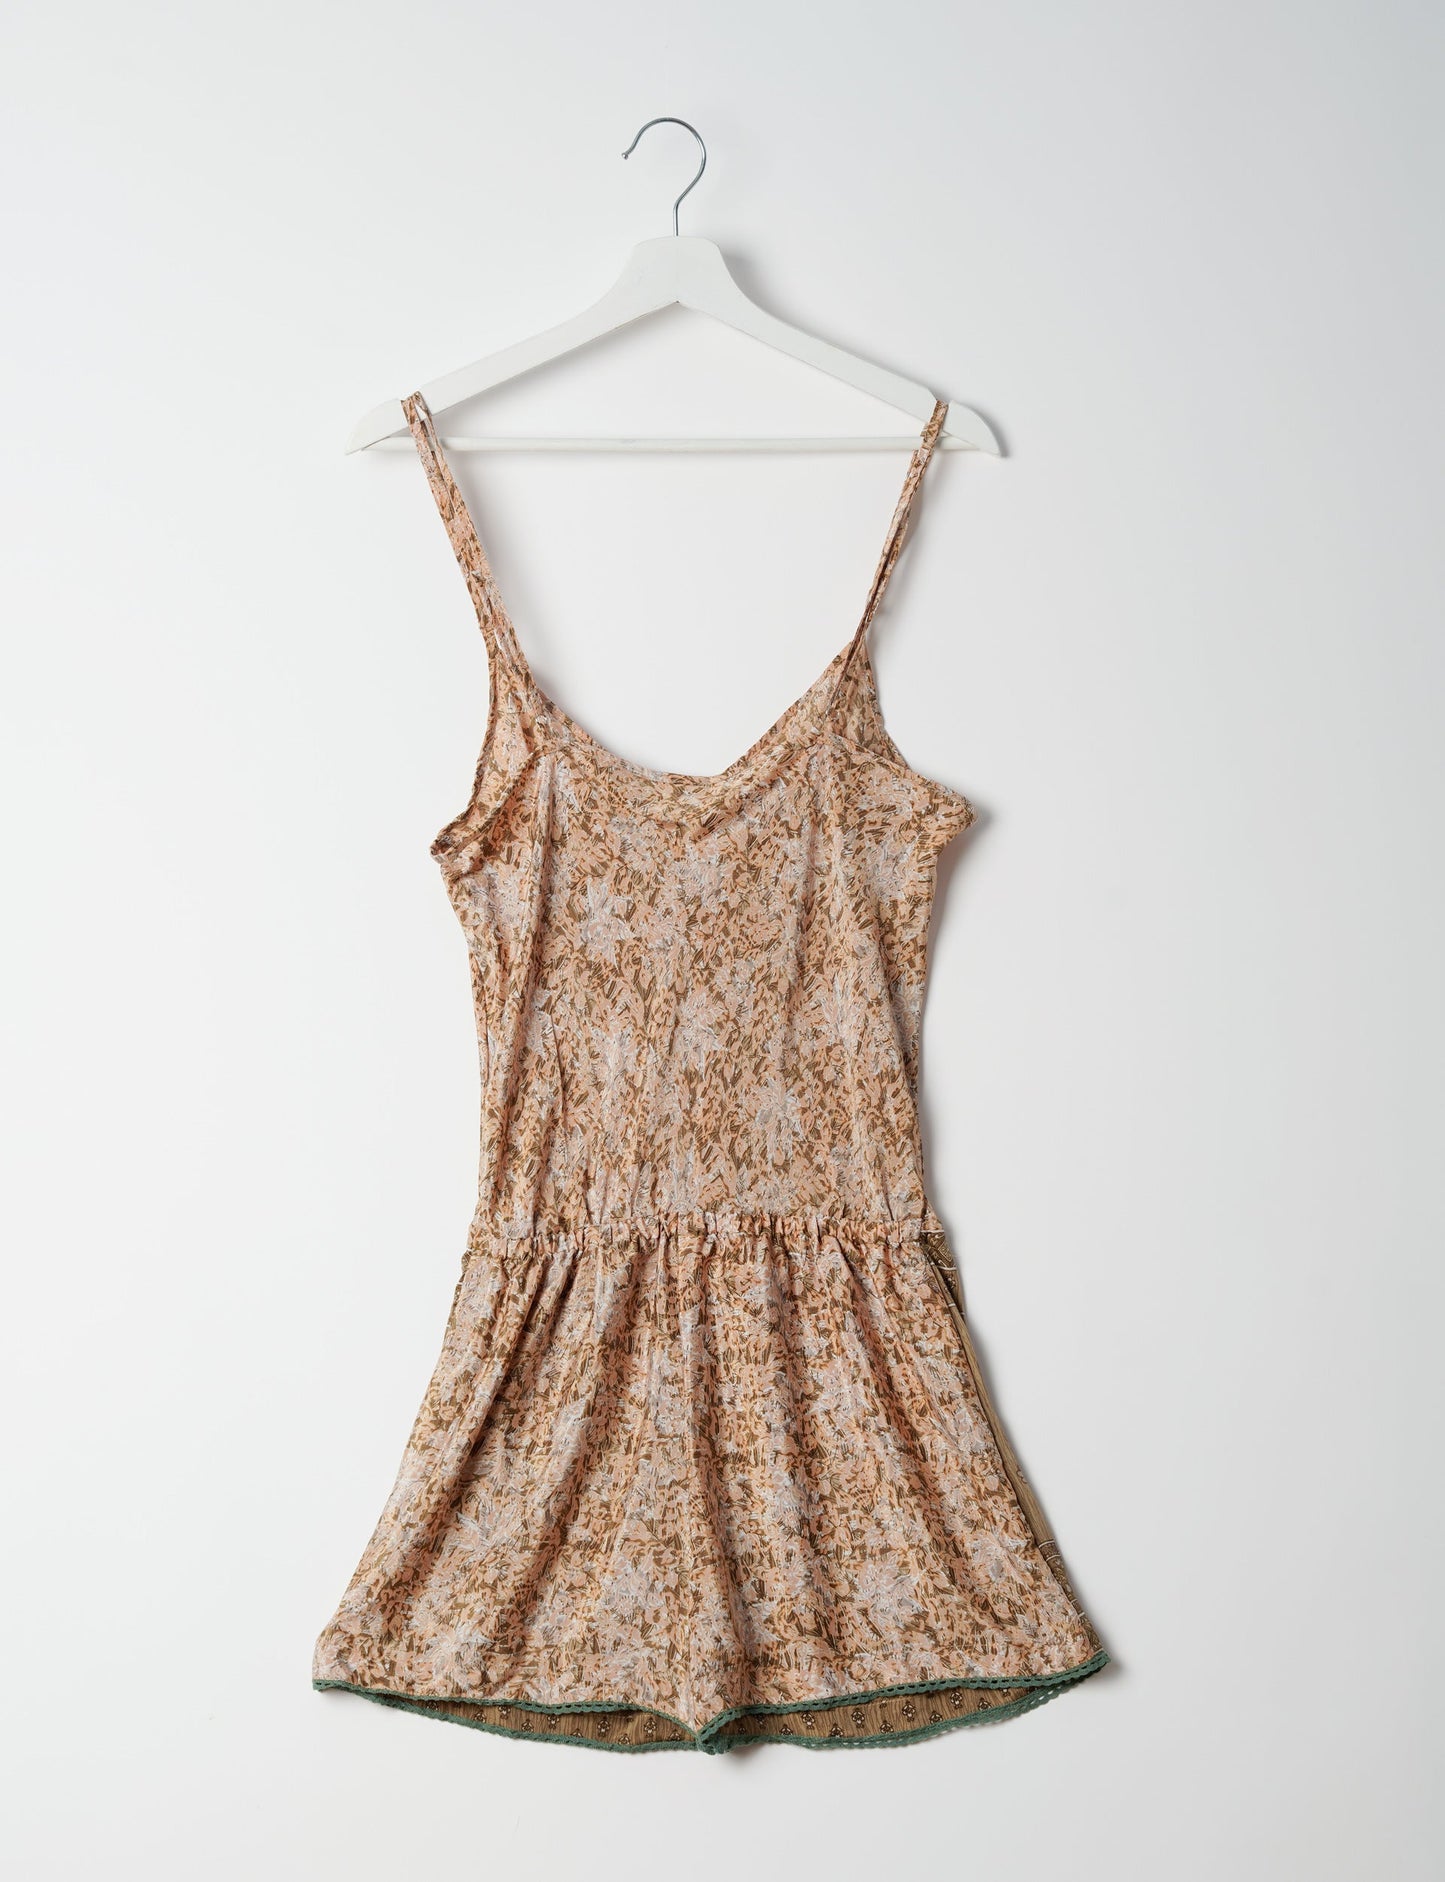 Vibrant playsuit with lace accents, crafted from upcycled saris. Embrace ethical fashion with this unique piece designed for conscious consumers.